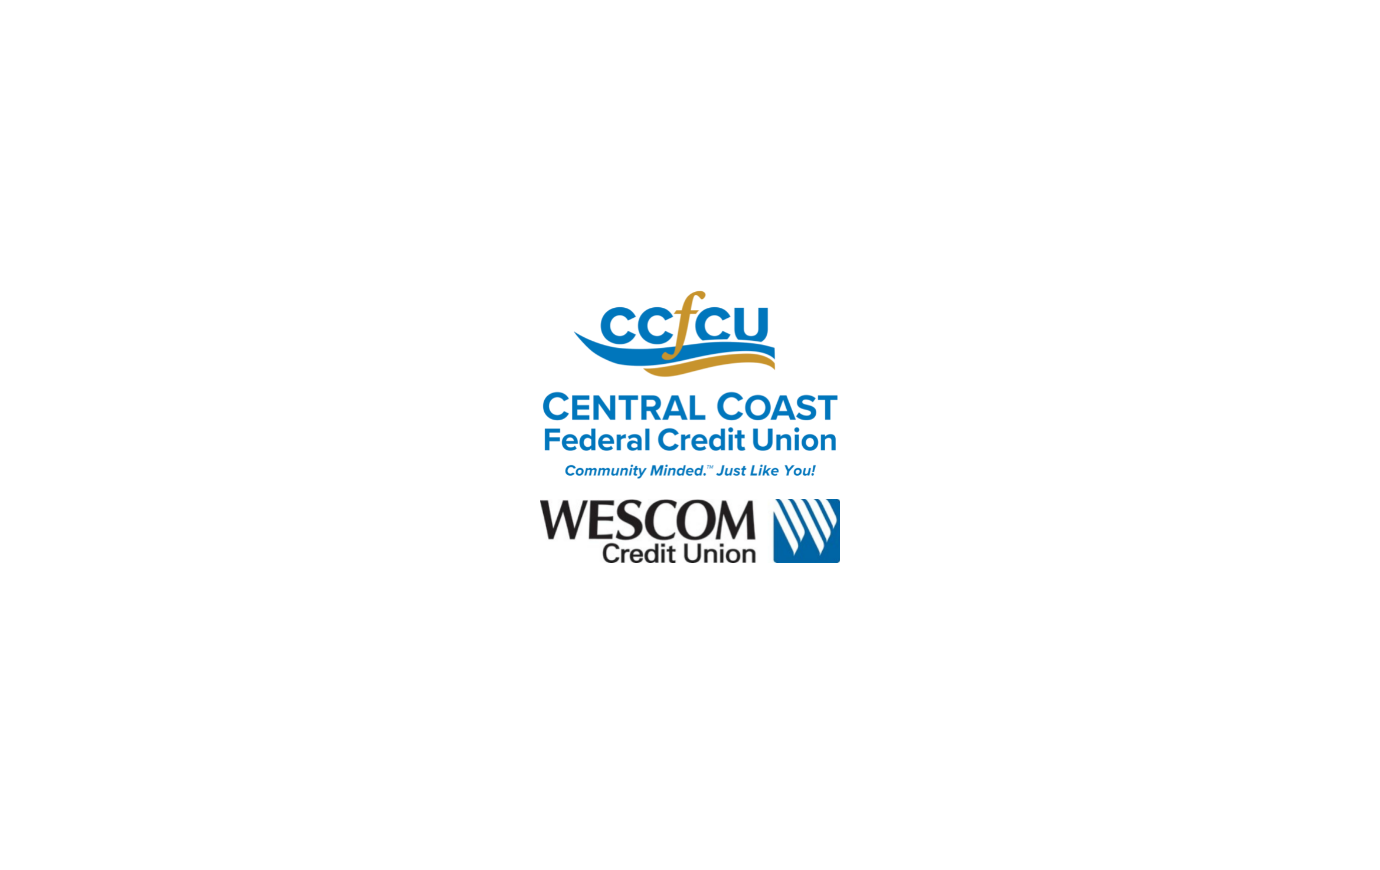 Link to Central Coast Federal Credit Union and Wescom Credit Union merger logo